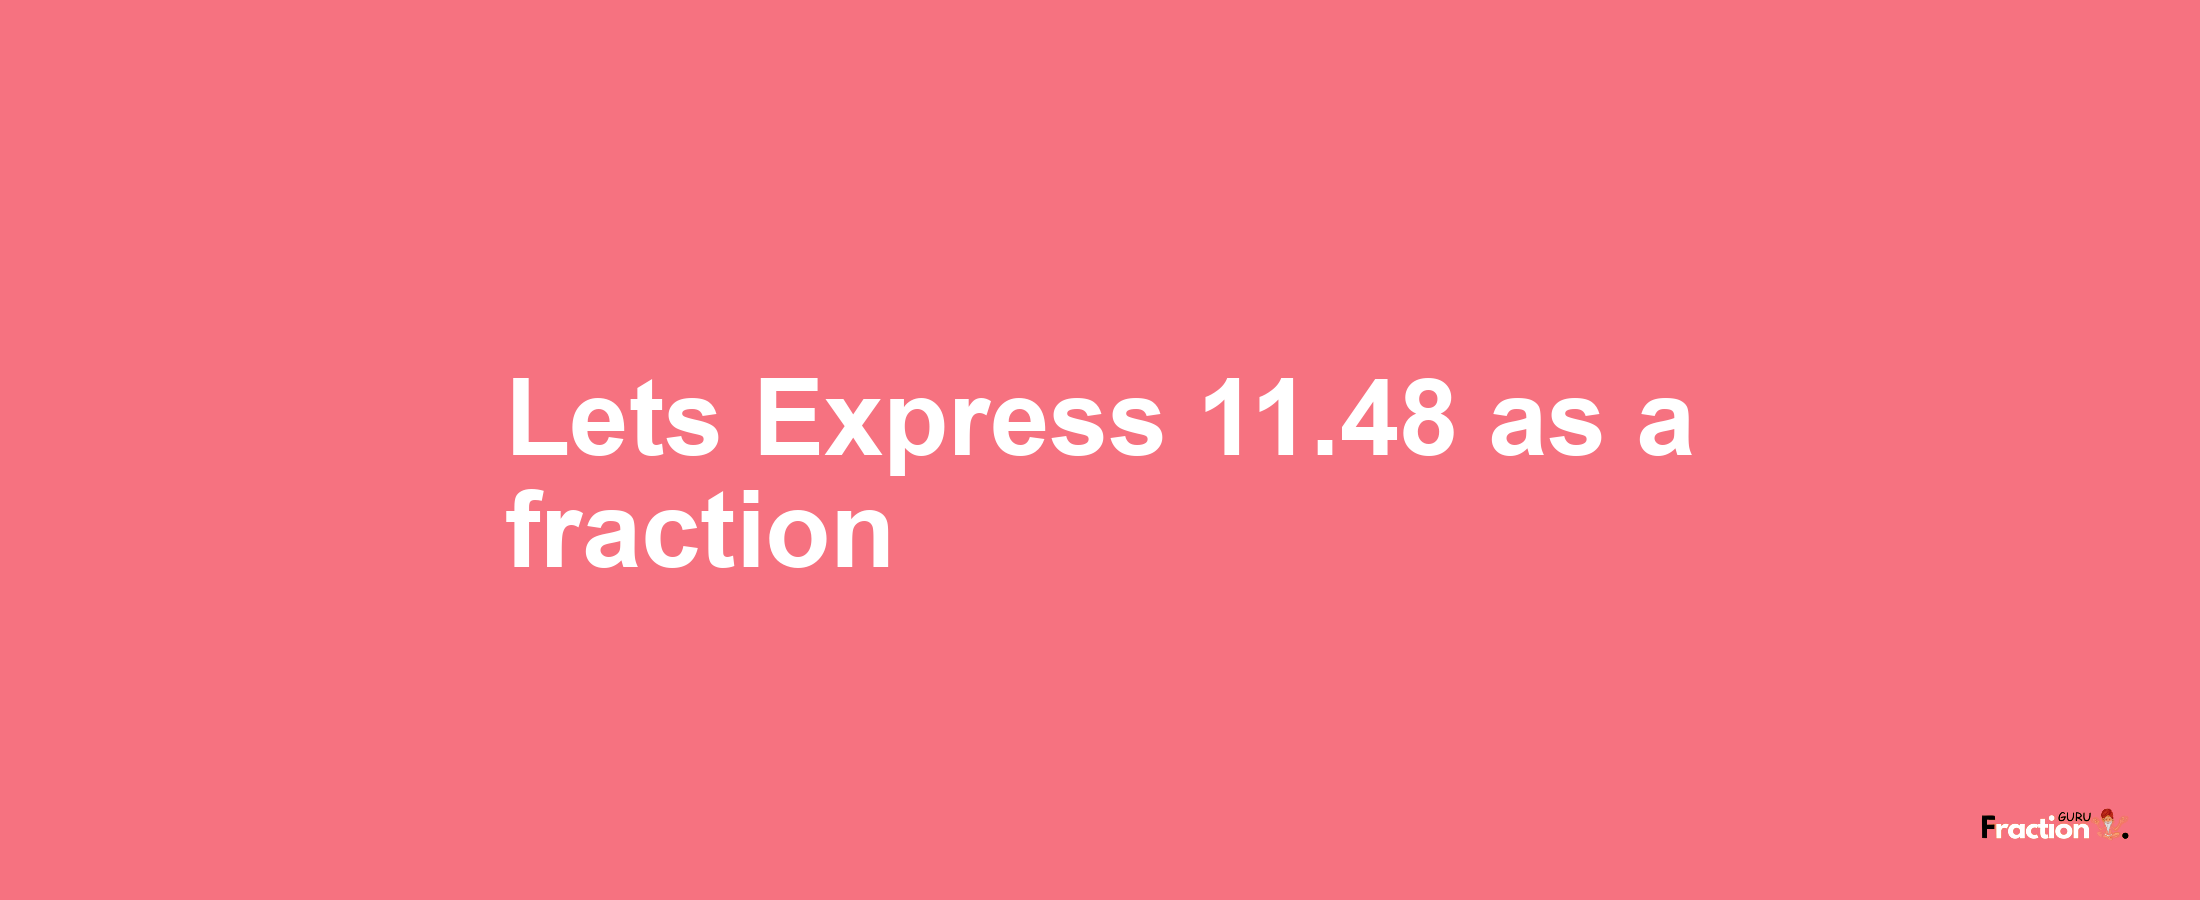 Lets Express 11.48 as afraction